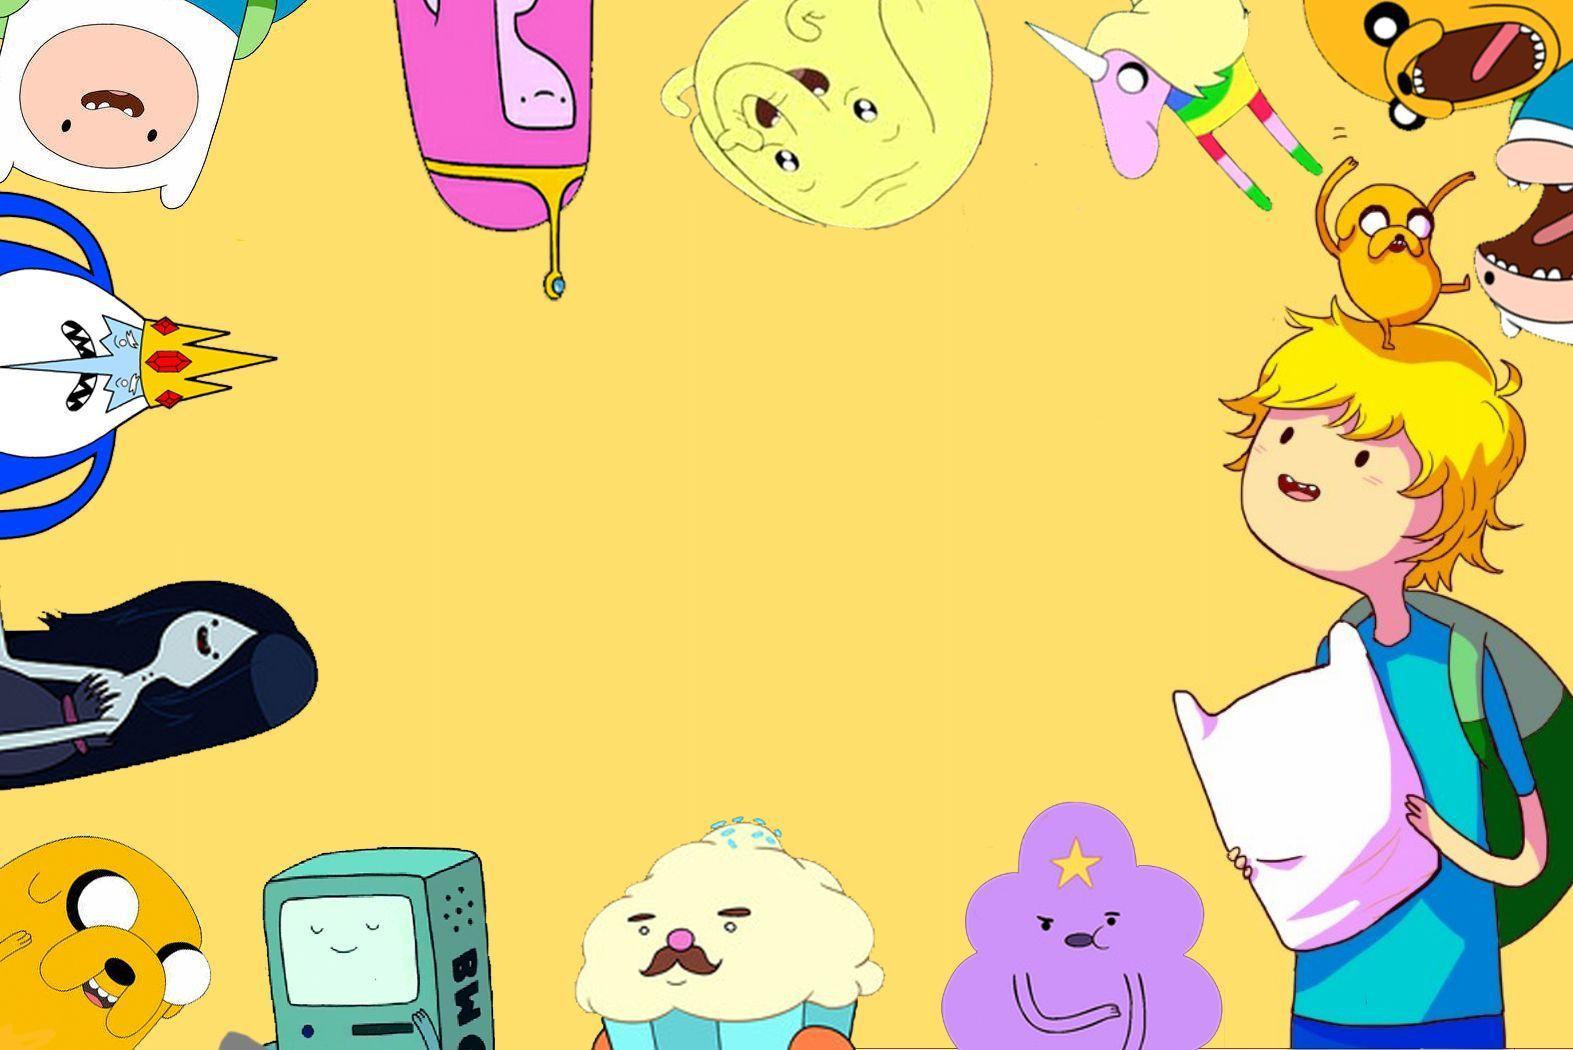 Adventure Time Wallpaper and Background